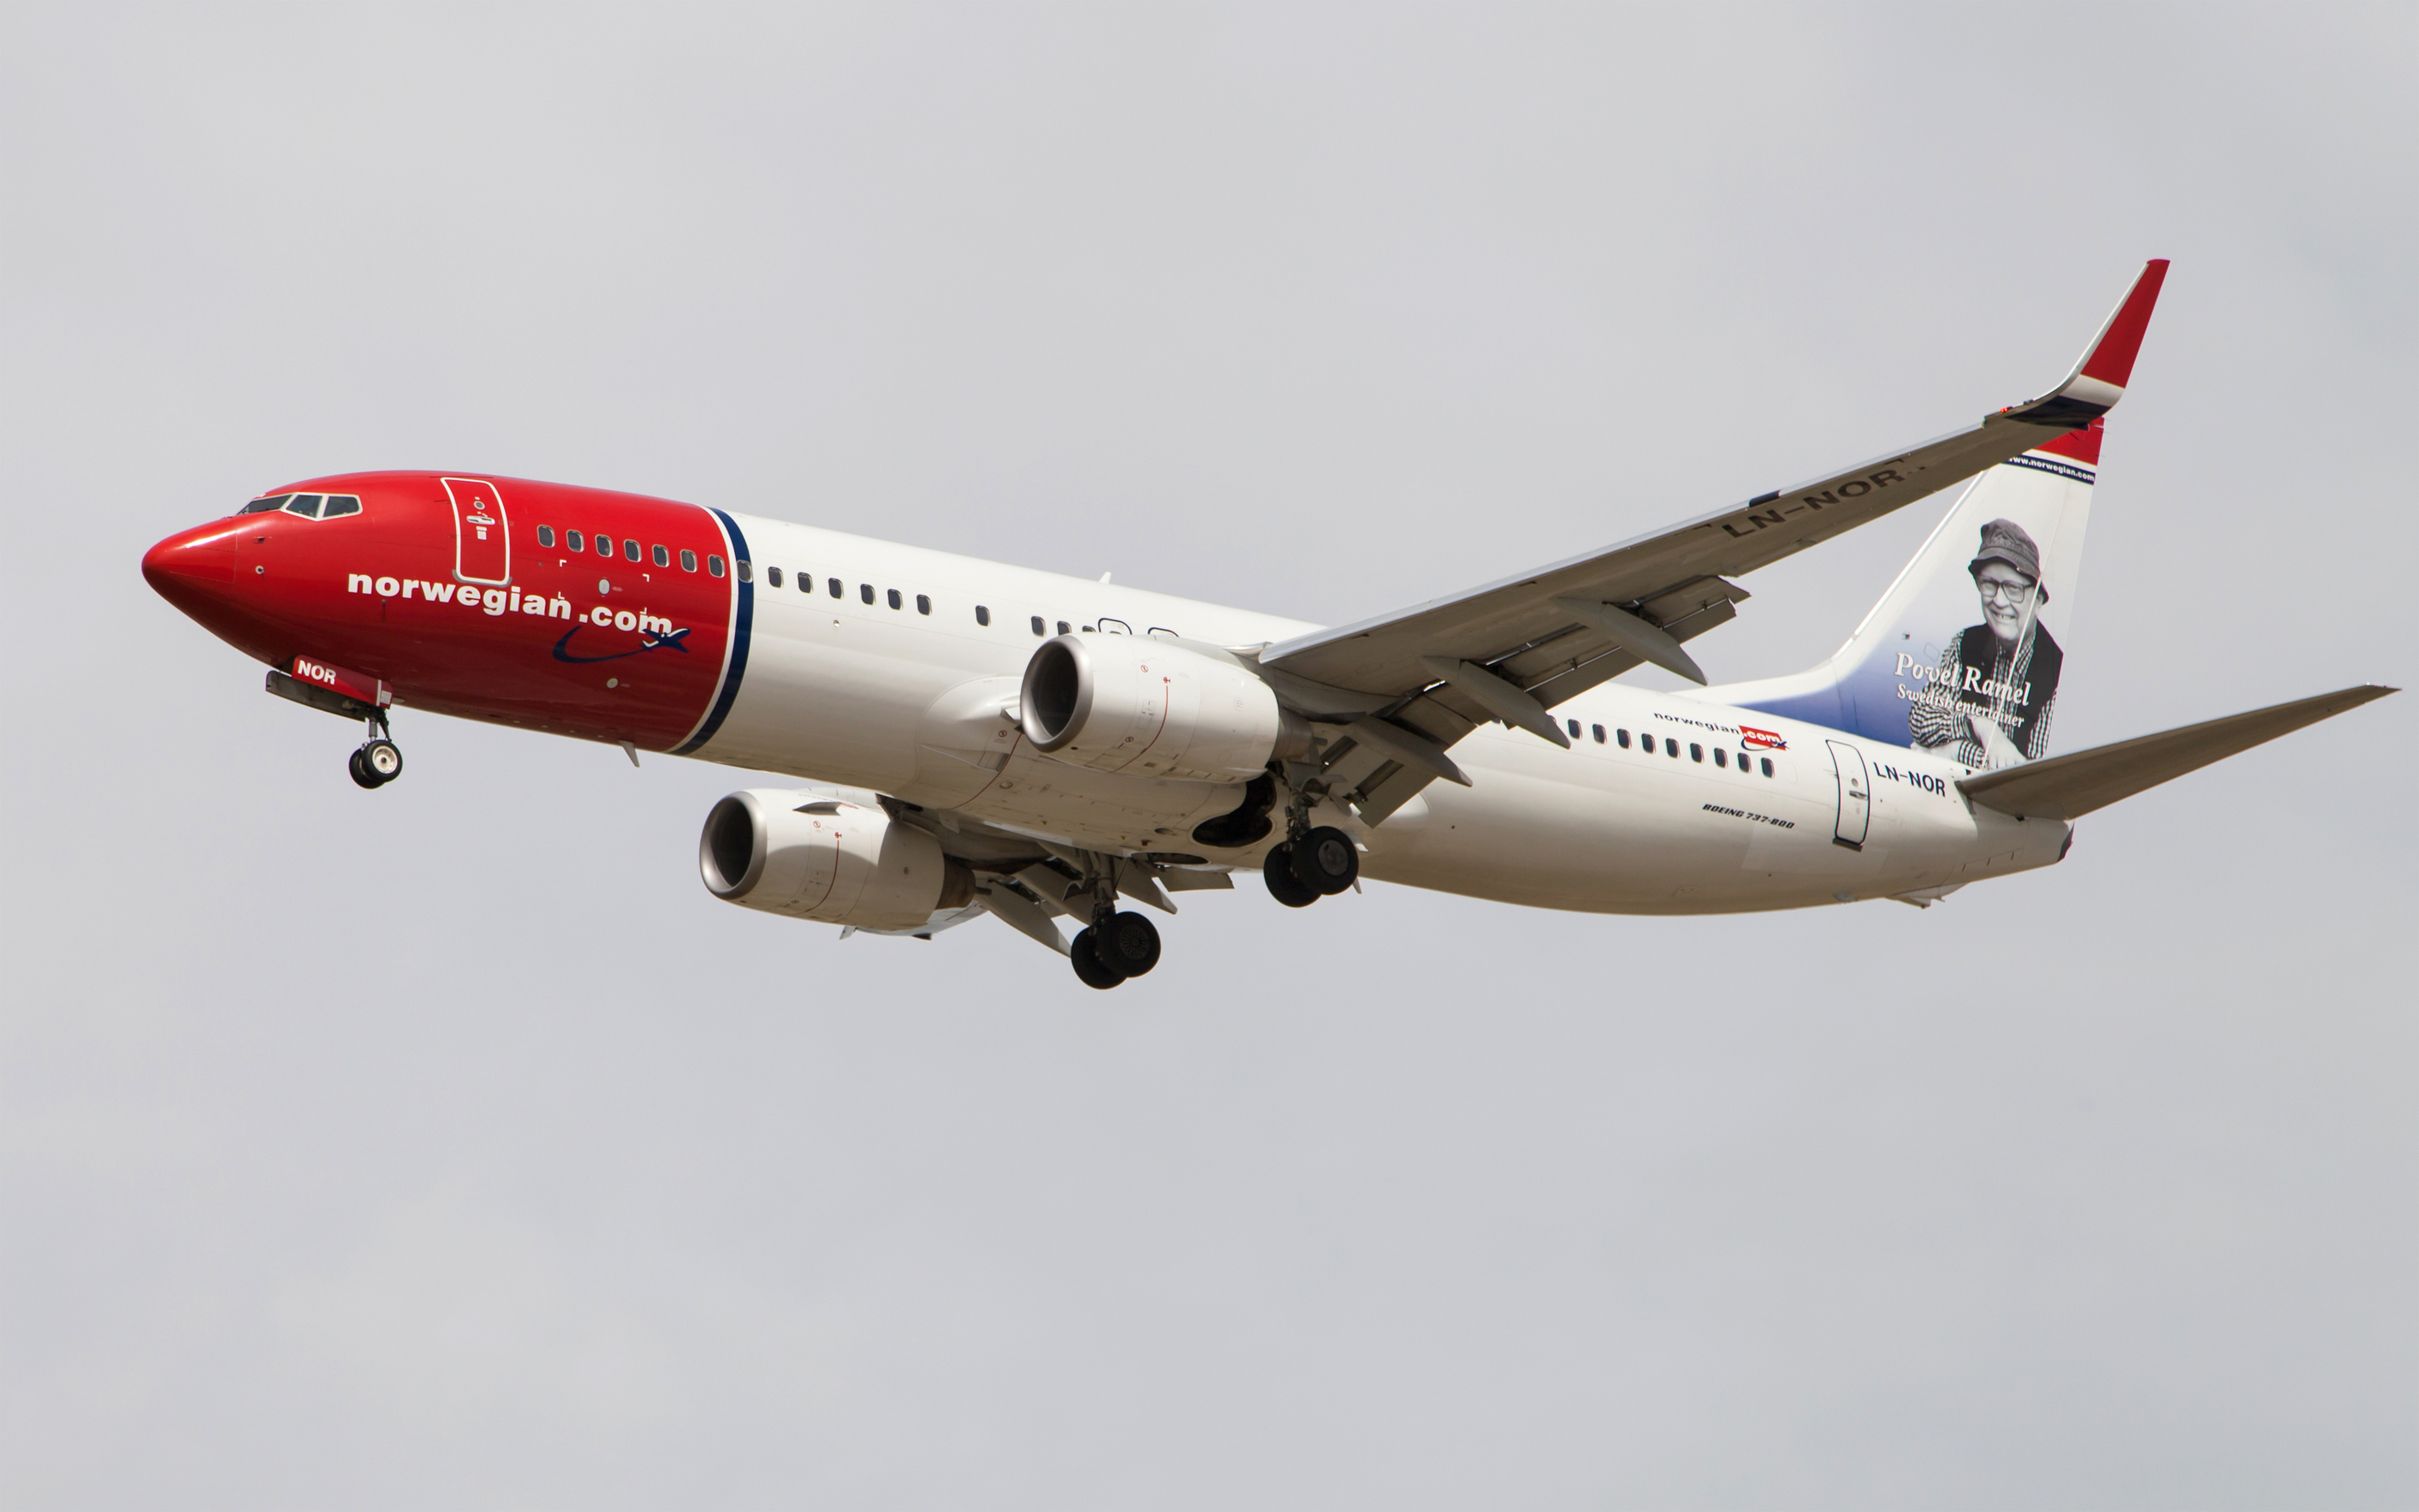 Norwegian Airlines fall sale: $49 to the Caribbean, $89 to Europe one-way